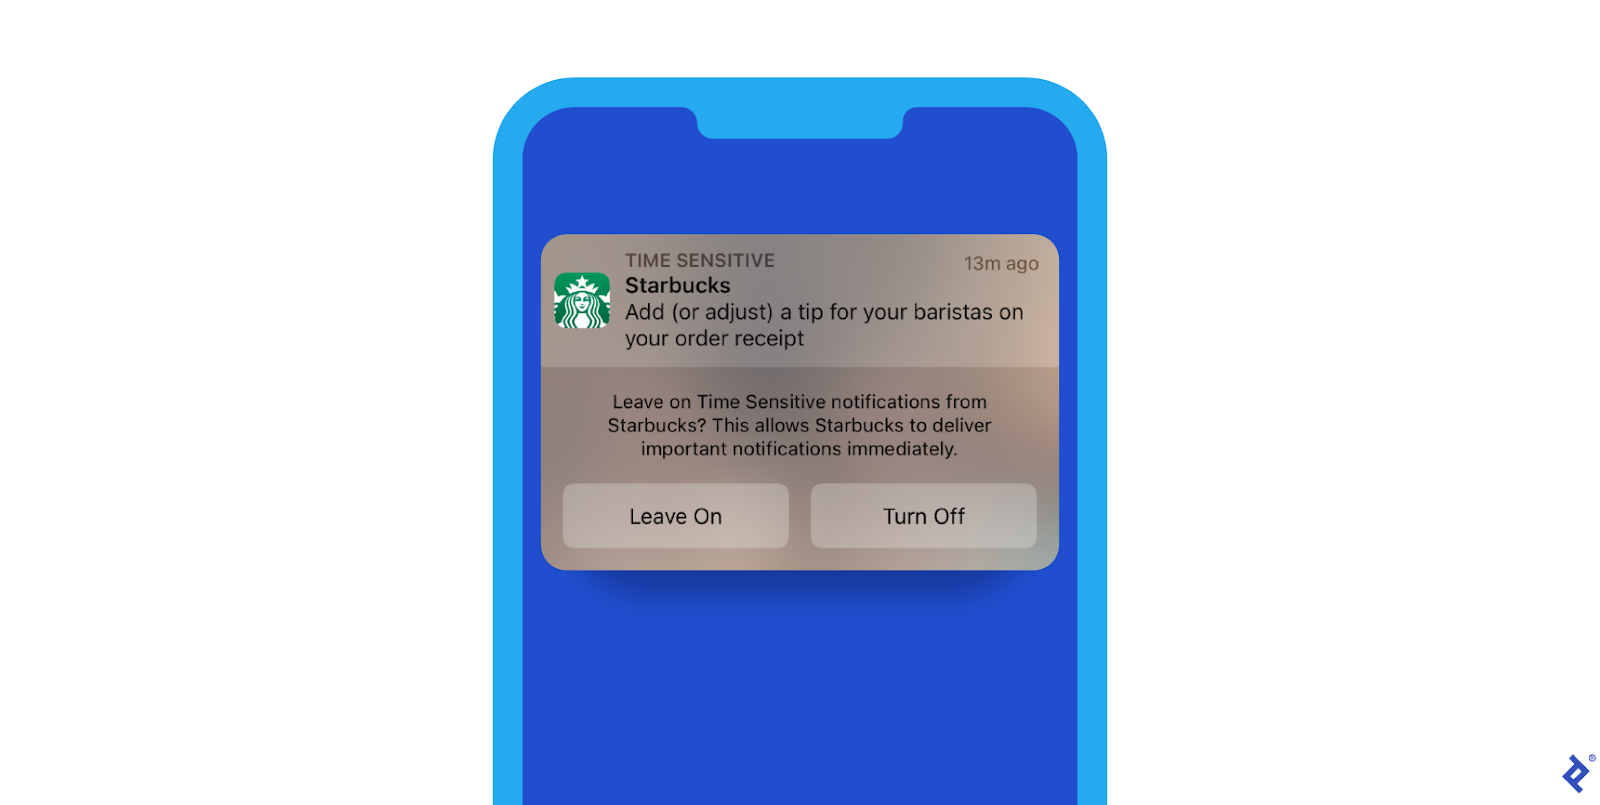 A blue illustrated mobile phone with a screenshot of a push notification from Starbucks, which is labeled âtime sensitiveâ and reads âAdd (or adjust) a tip for your baristas on your order receipt.â Under that it reads, âLeave on Time Sensitive notifications from Starbucks? This allows Starbucks to deliver important notifications immediately.â Below are two buttons that read âLeave Onâ and âTurn Off.â